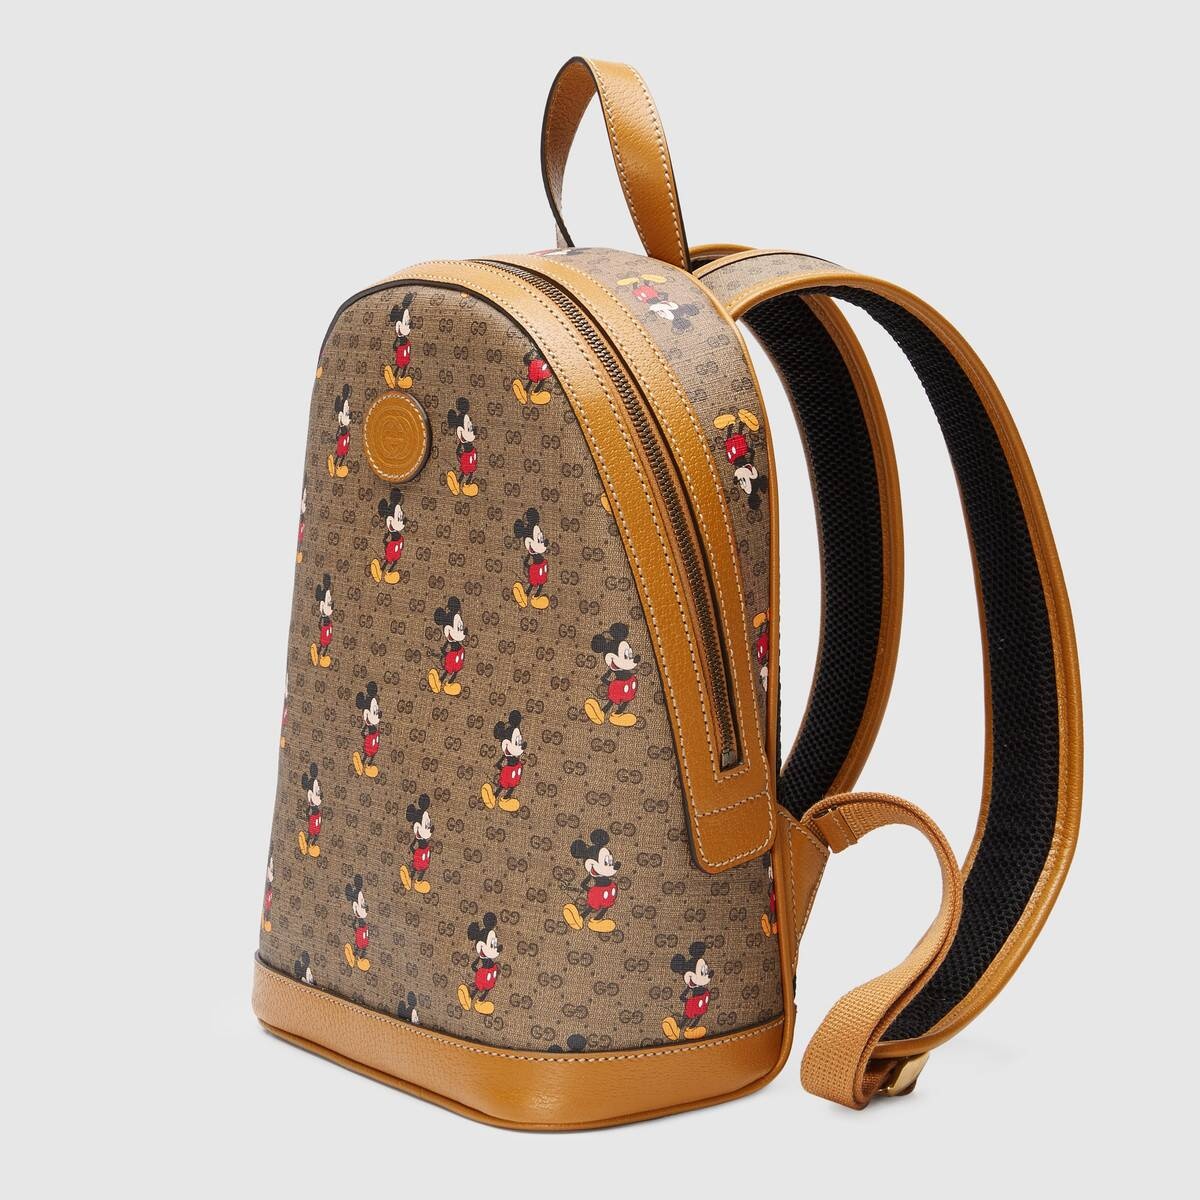 Disney x Gucci small backpack - 2